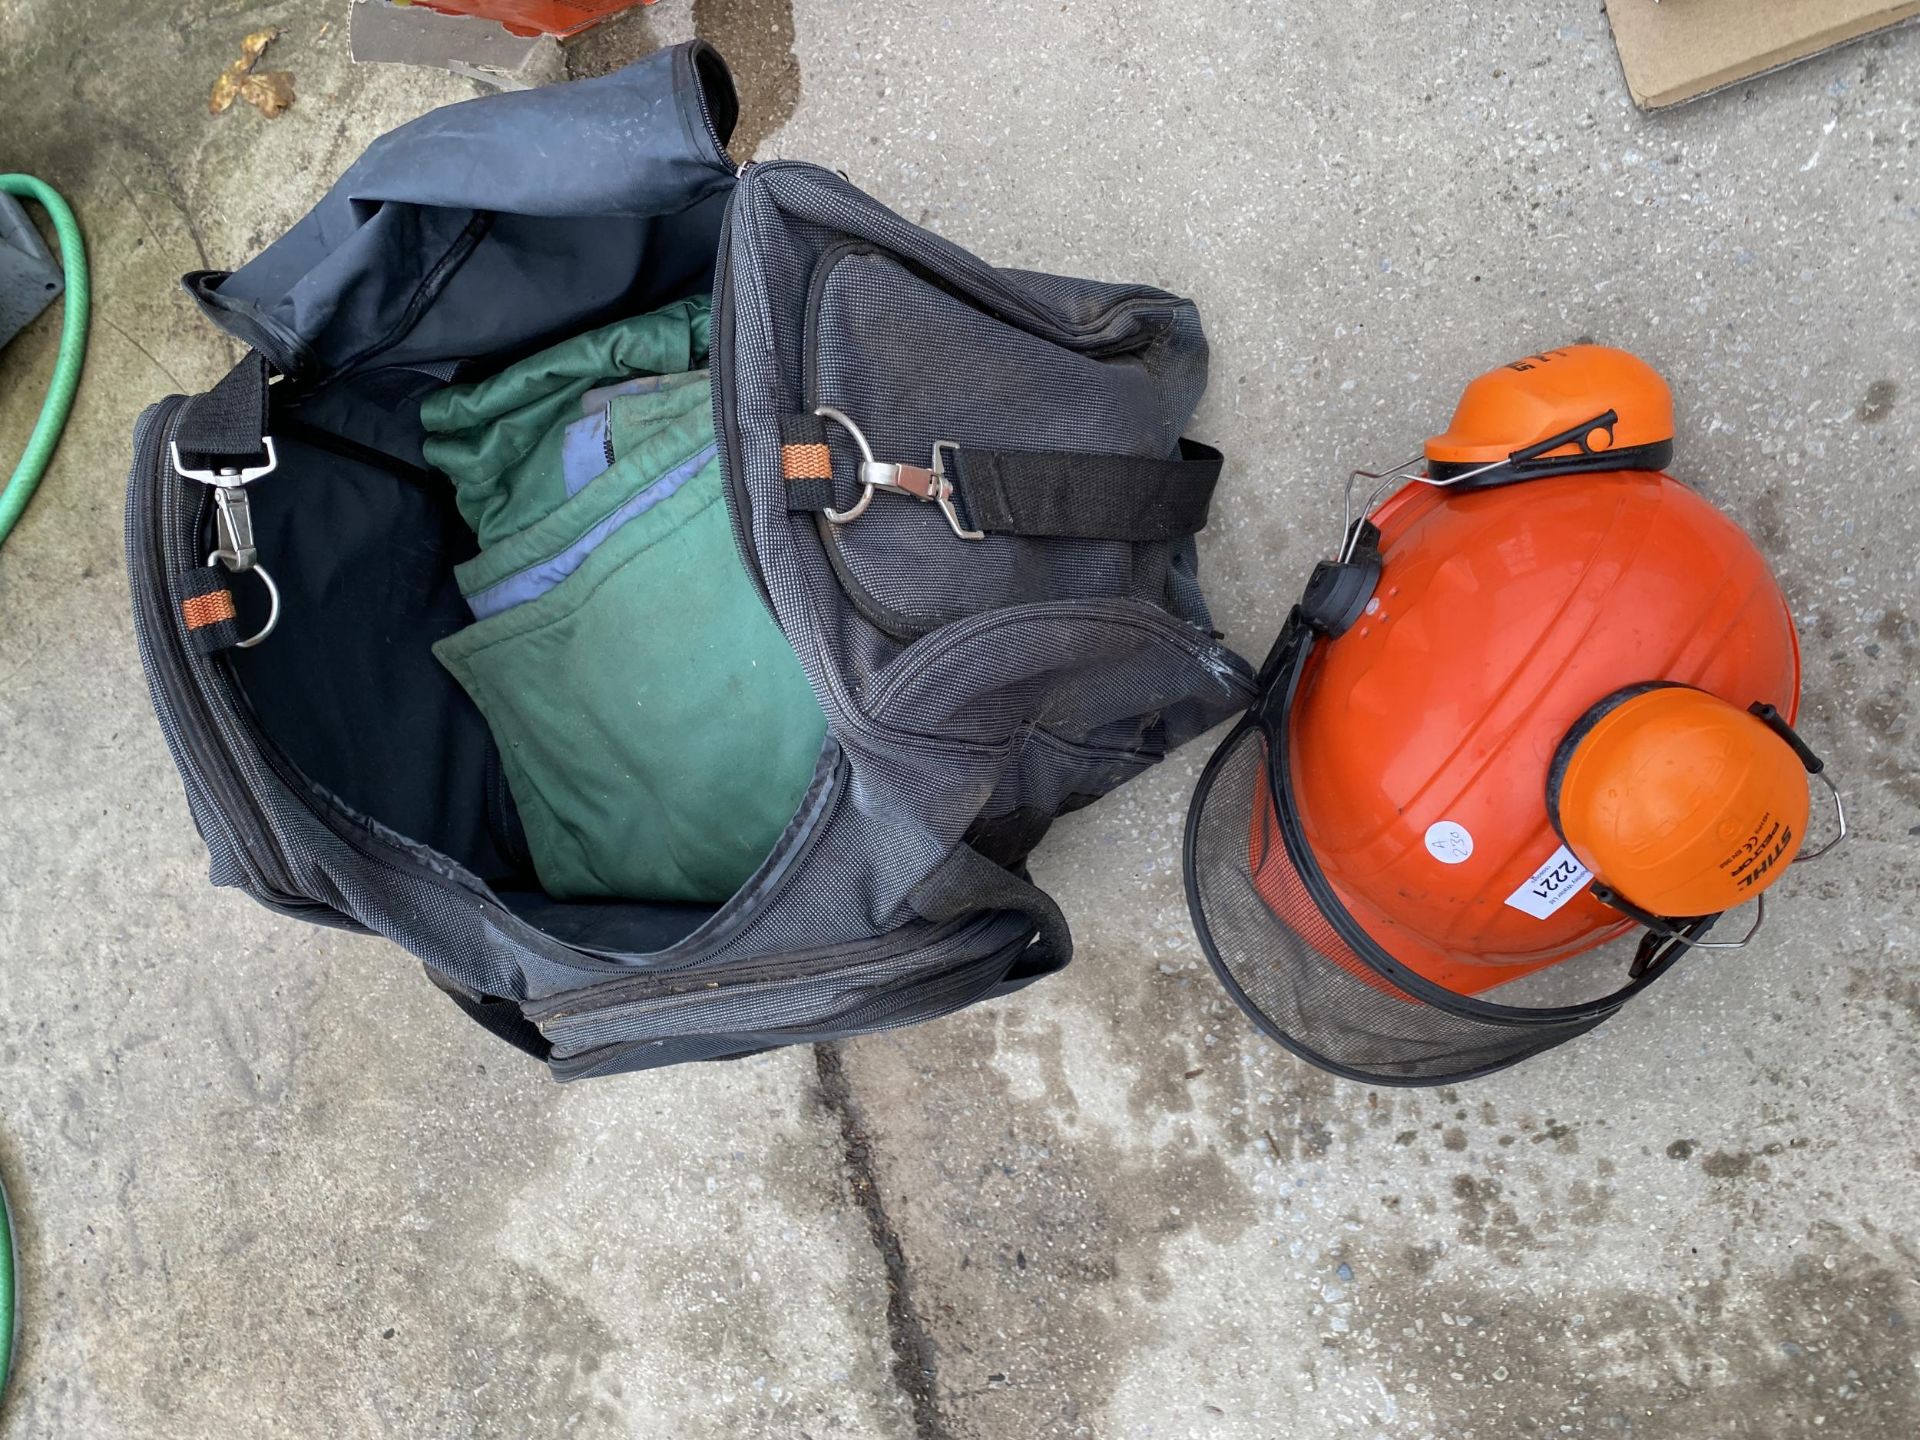 A COLLECTION OF STIHL SAFETY EQUIPMENT TO INCLUDE HELMET, OVERALLS, ETC